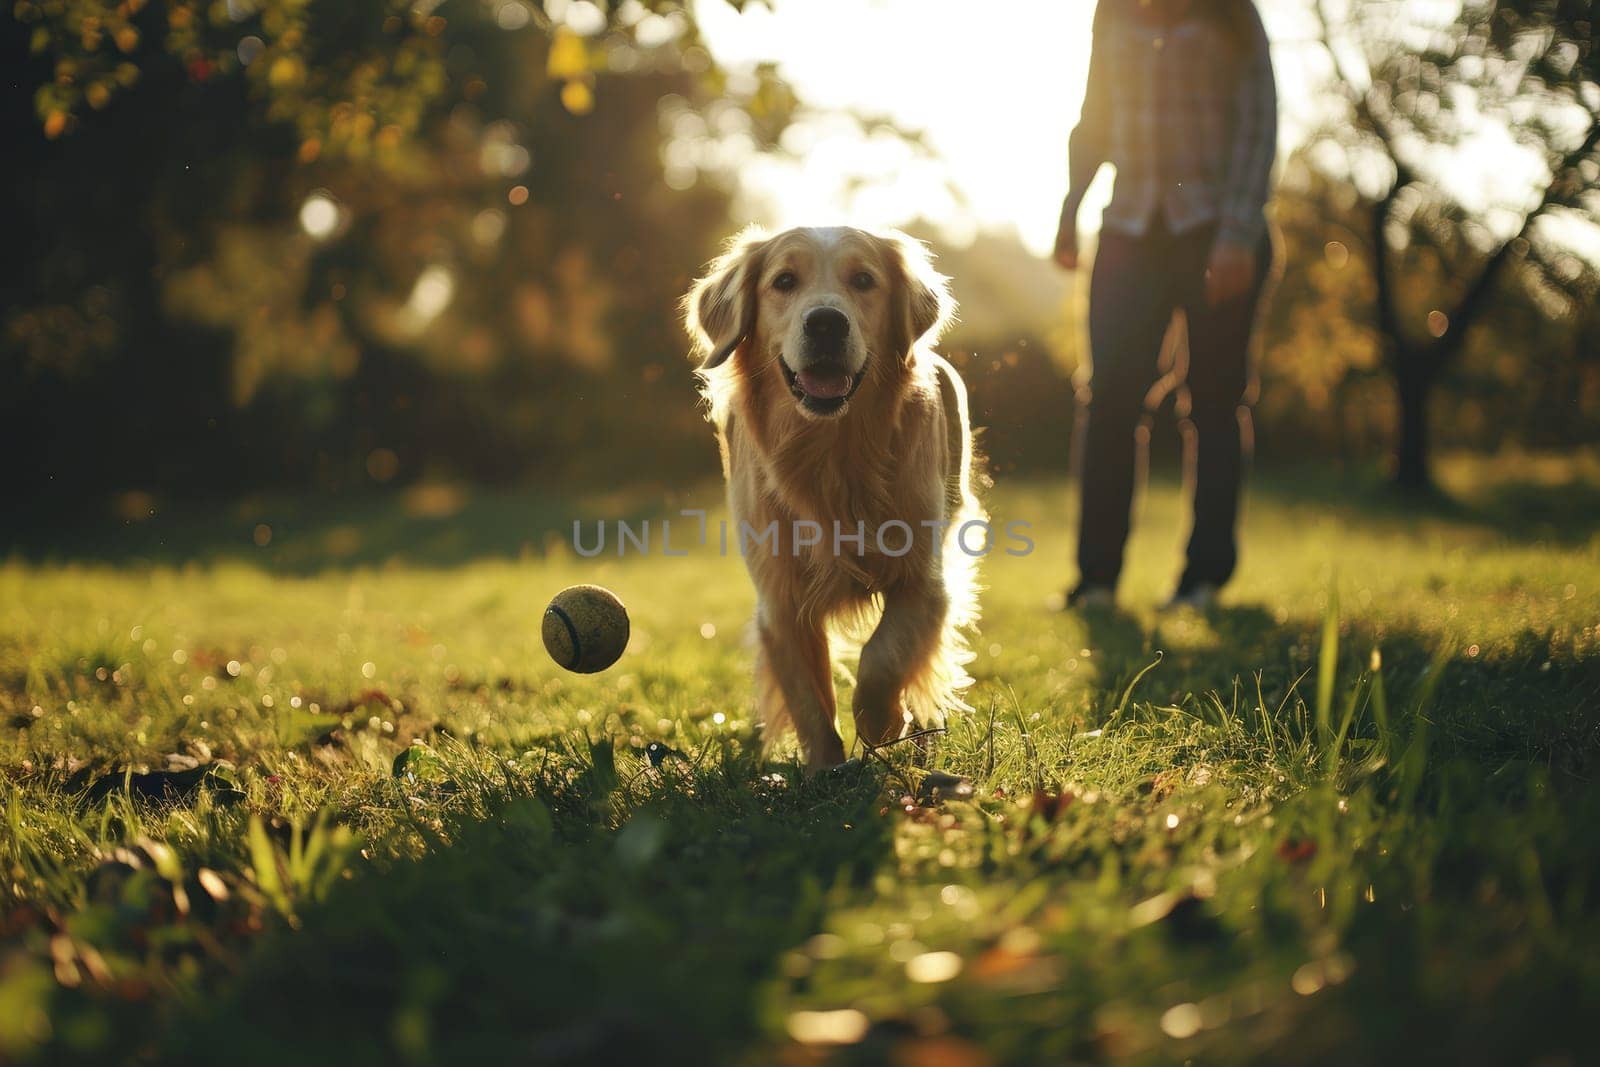 A friendly Dog happily plays fetch with its owner in a lush green park, friendship with animals.